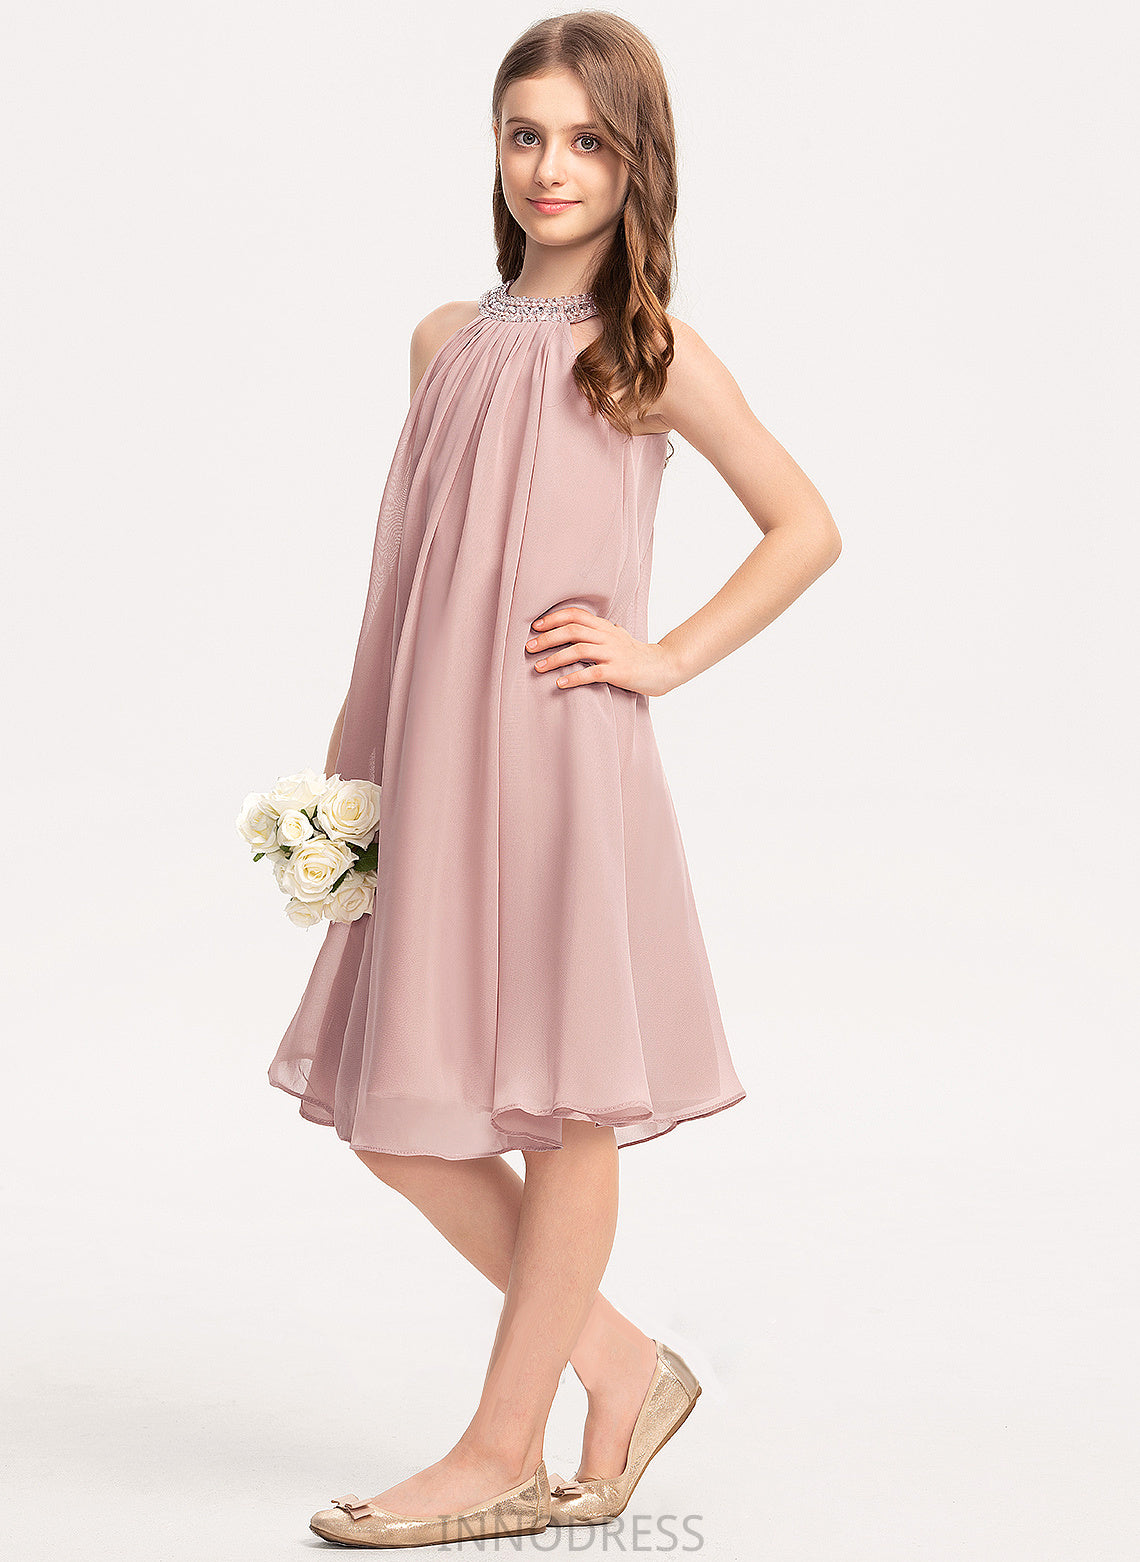 Chiffon Scoop Knee-Length Camryn With Neck Junior Bridesmaid Dresses A-Line Sequins Beading